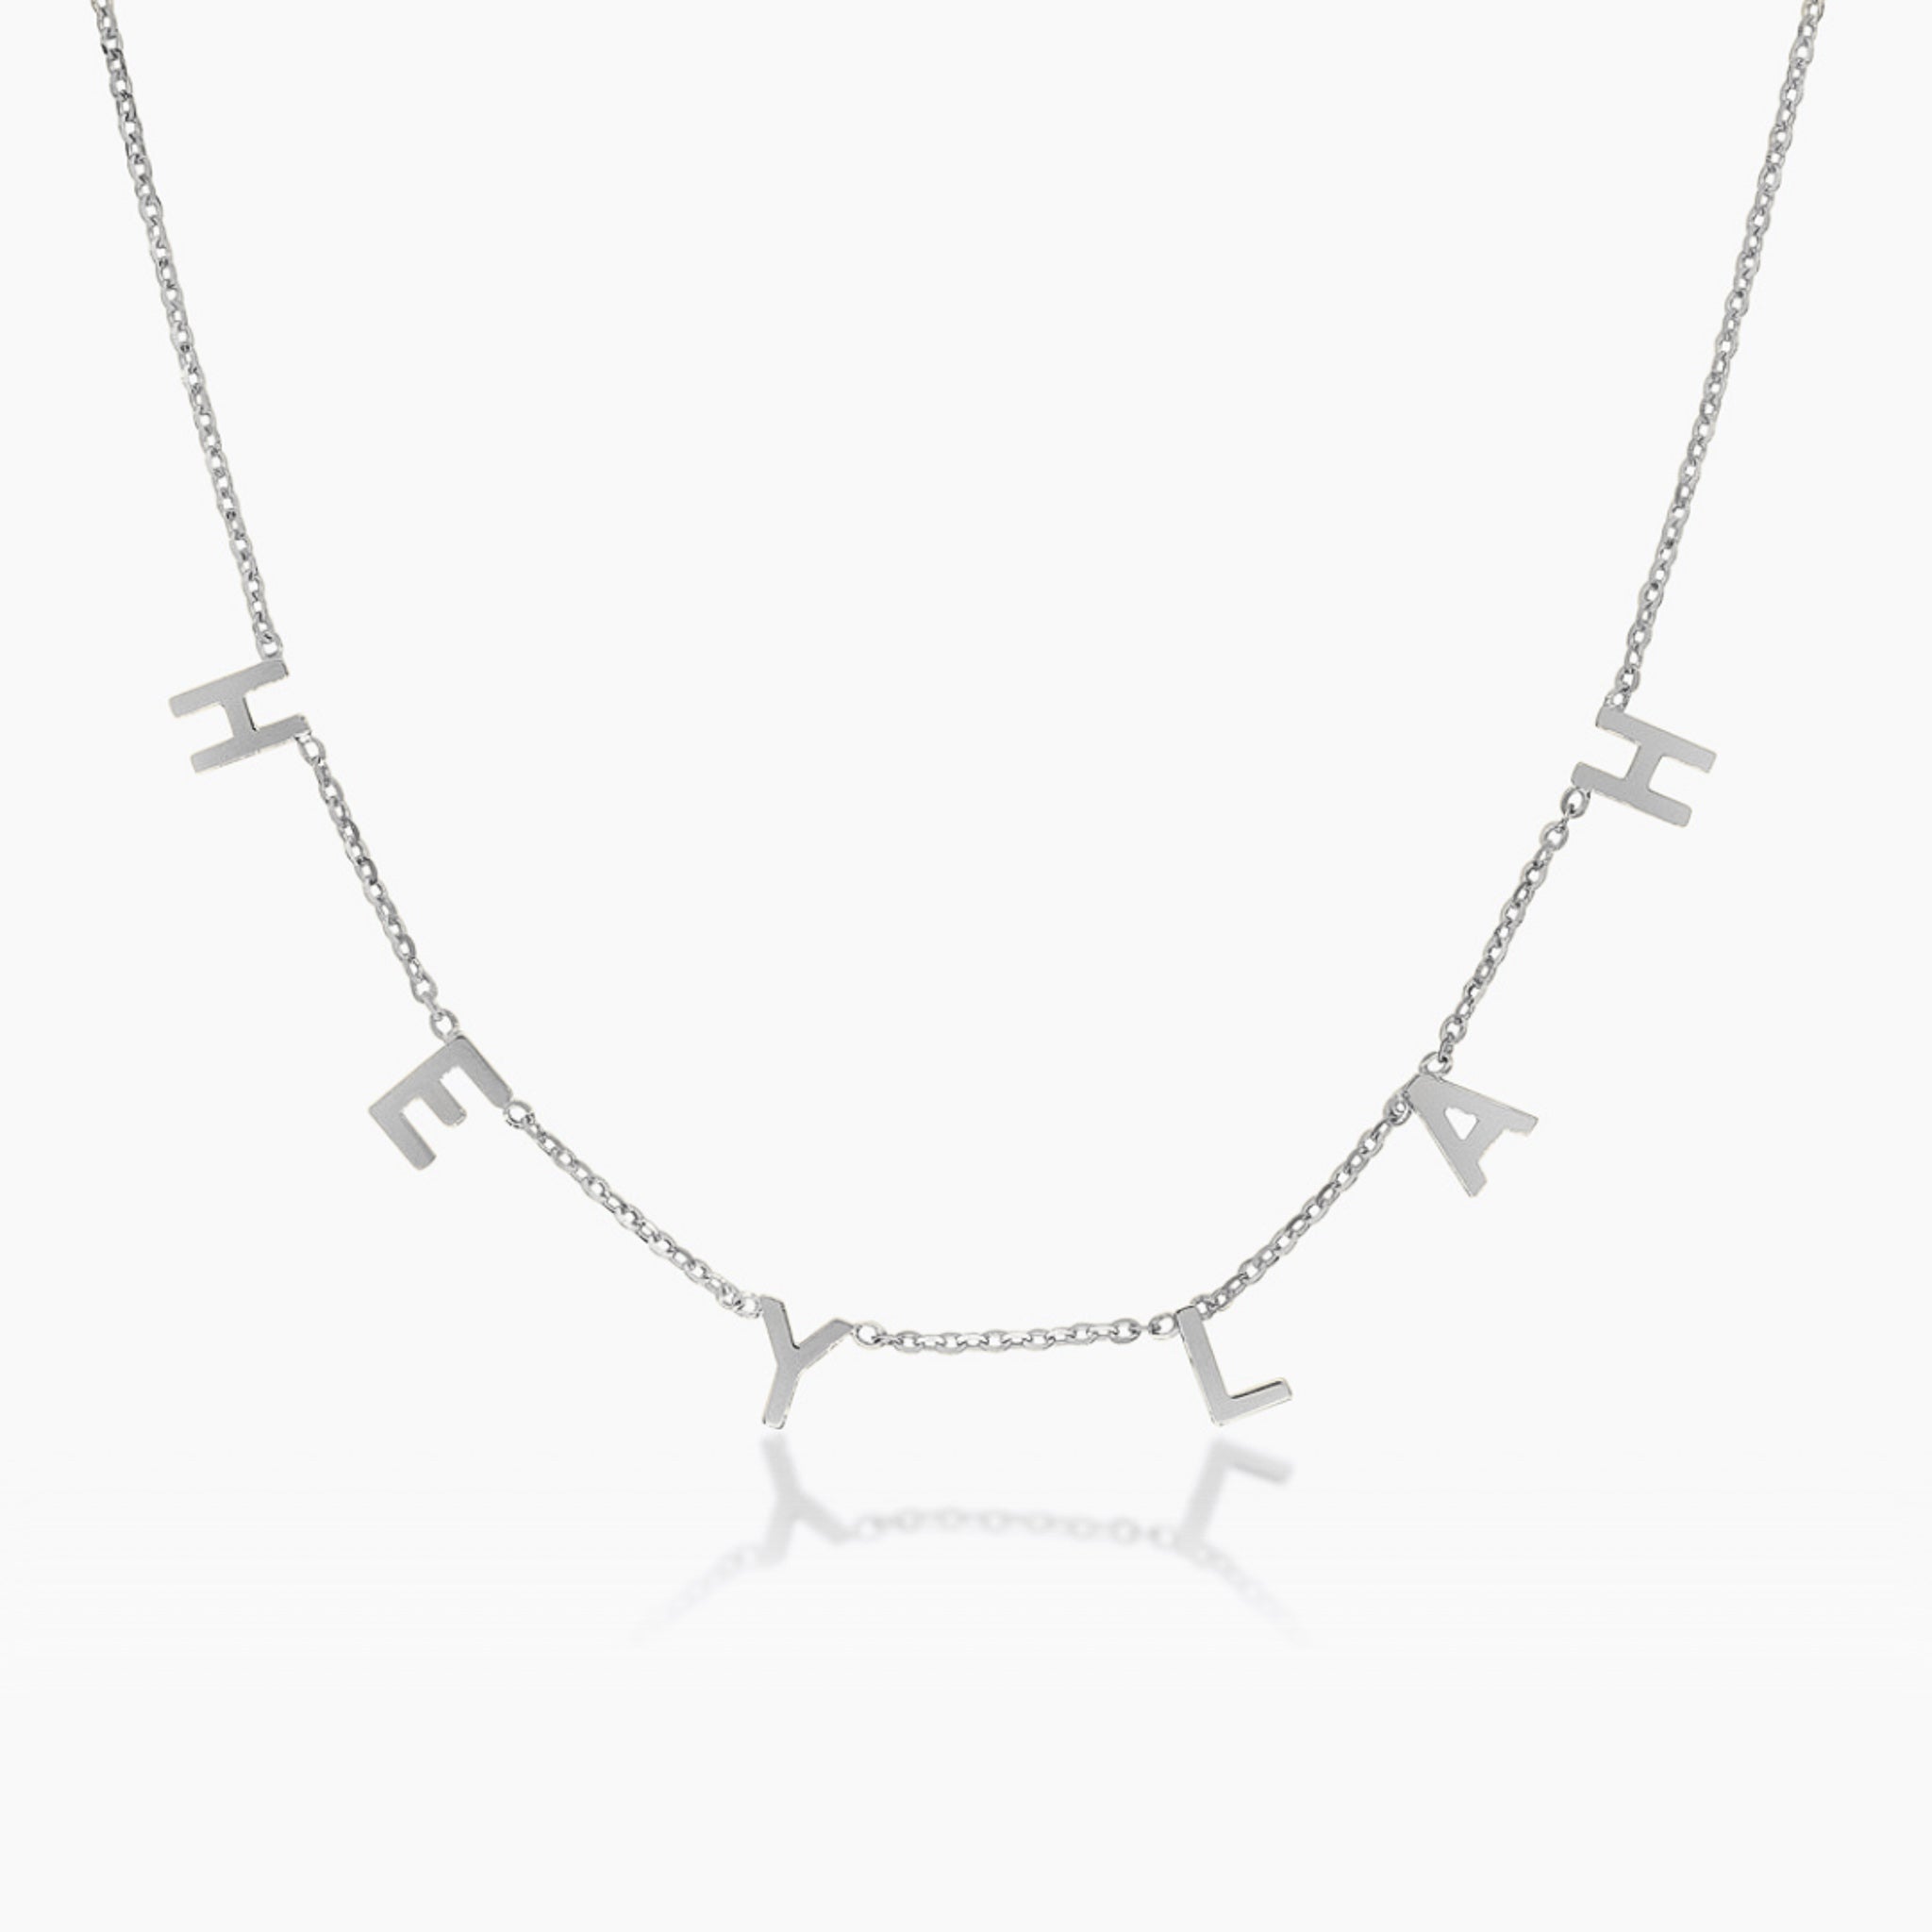 14K WHITE GOLD CHARM FLOATING NAME NECKLACE